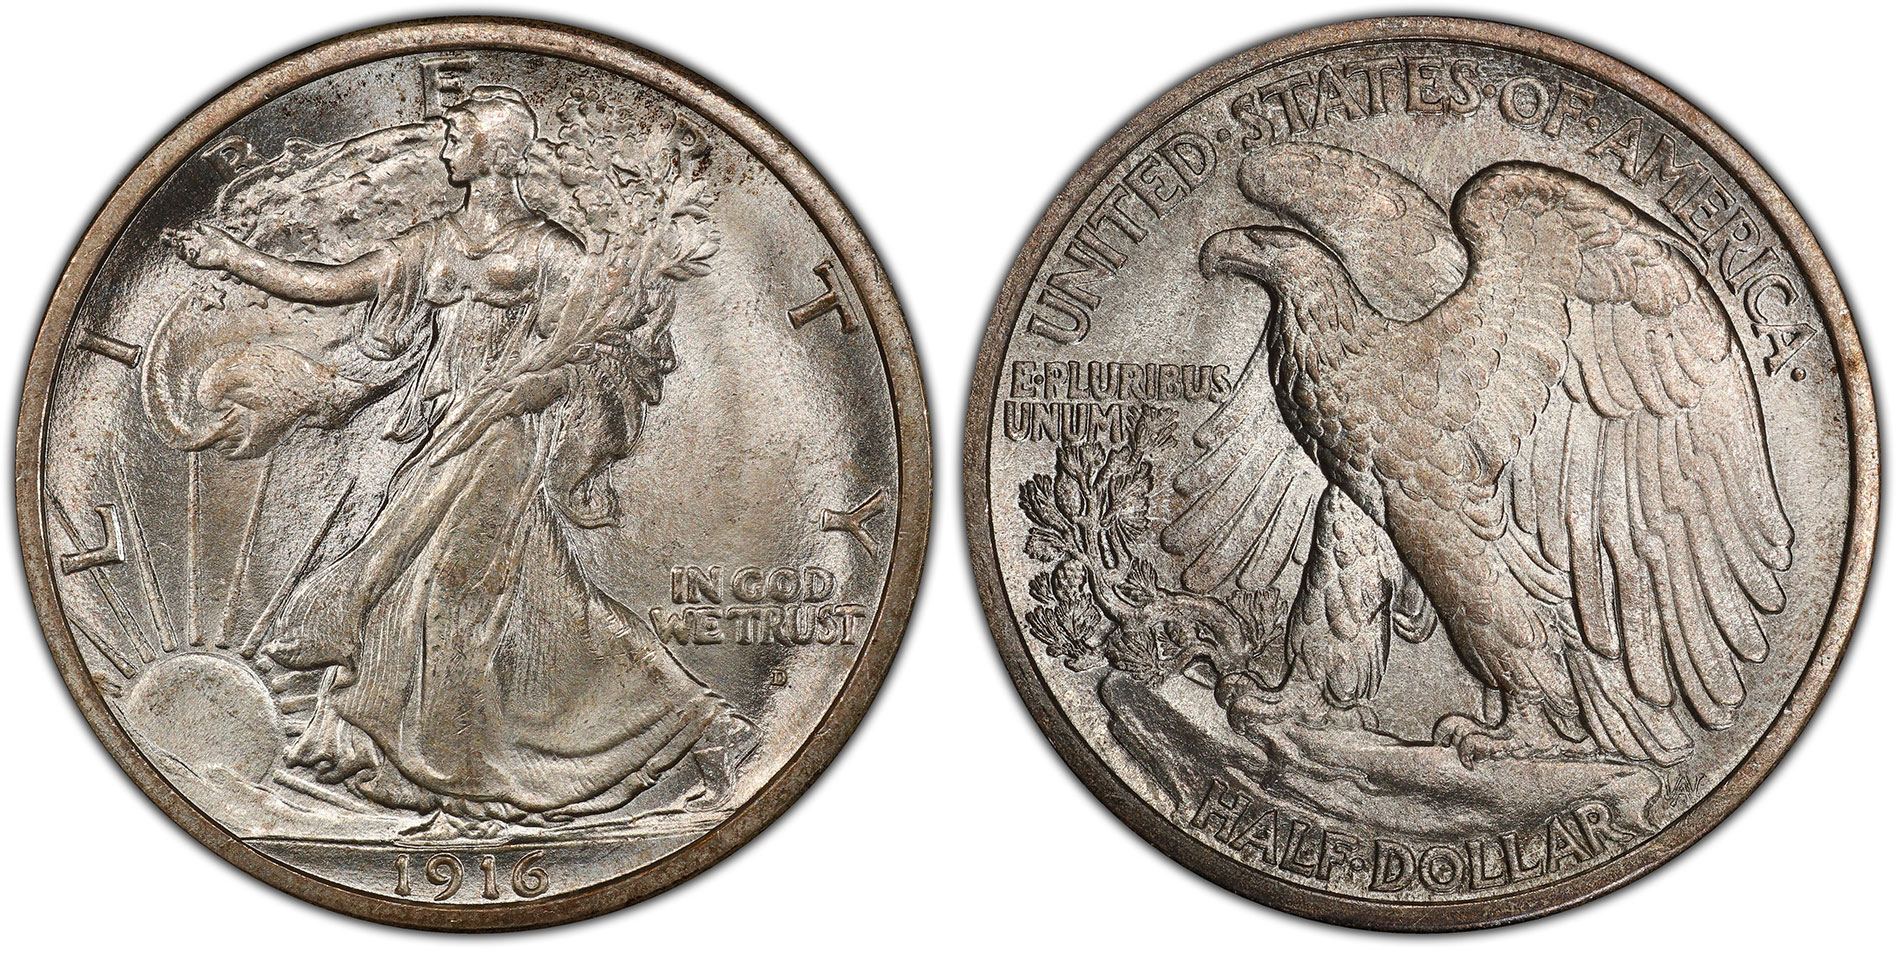 Why Was the Mintmark Moved on Walking Liberty Half Dollars?